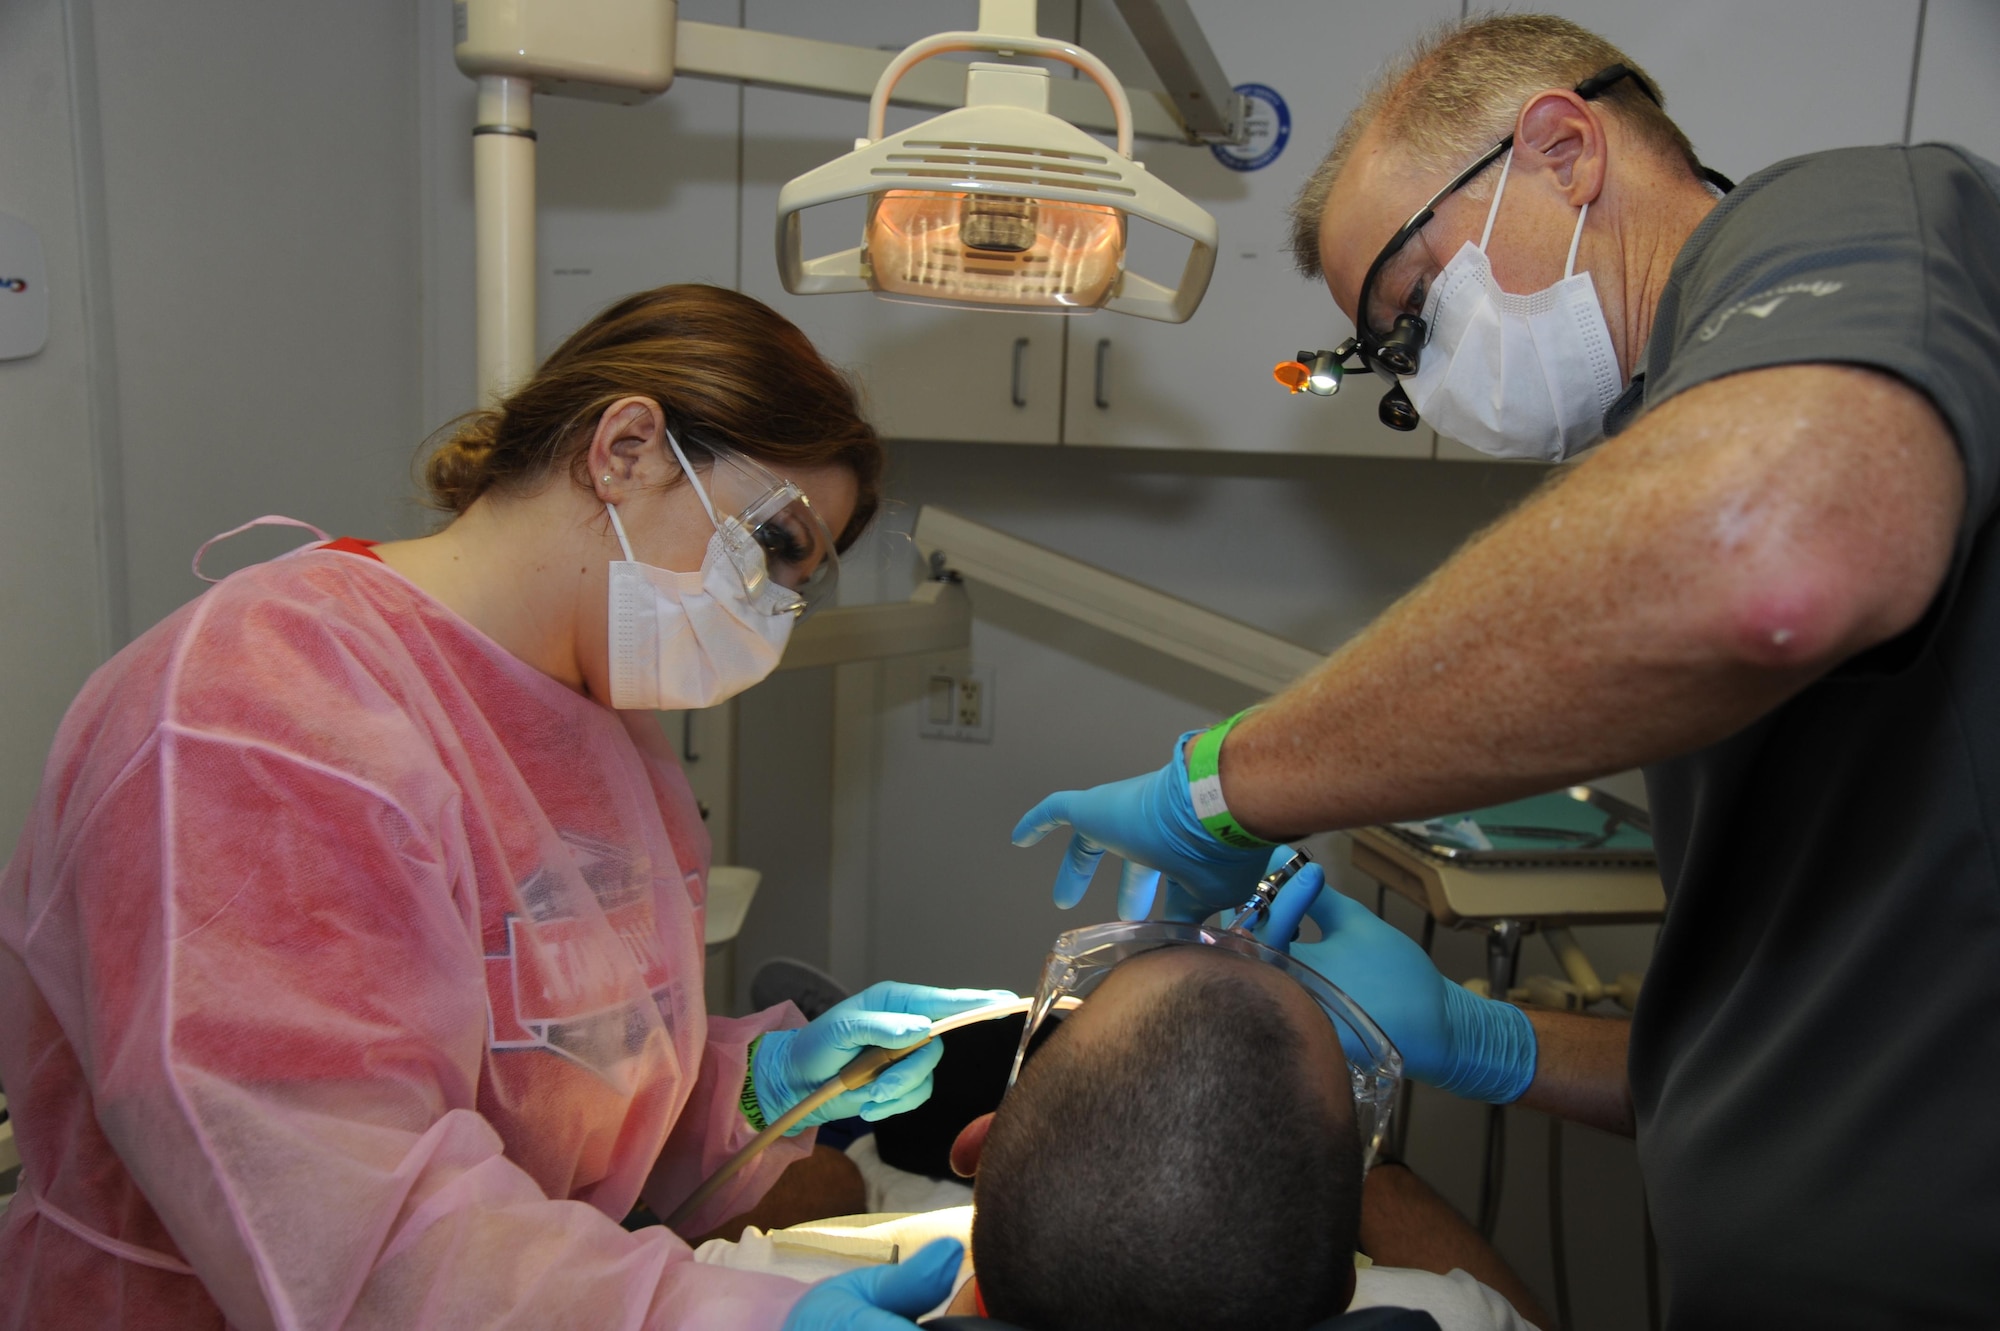 Staff Sgt. Kerry Tromba, 927th Force Support Squadron, MacDill Air Force Base also a dental assistant along with Dr. Stephen Durrett provide dental care during Operation Stand Down, an event designed to help local homeless veterans combating life on the streets. The event, held at the Veteran Memorial Park, Hudson, Florida, bussed in homeless veterans from surrounding areas to take advantage of the more than a dozen complimentary services, such as employment workshops, hot meals, hot showers and haircuts, and medical services. (U.S. Air Force photo by Tech. Sgt. Peter Dean)